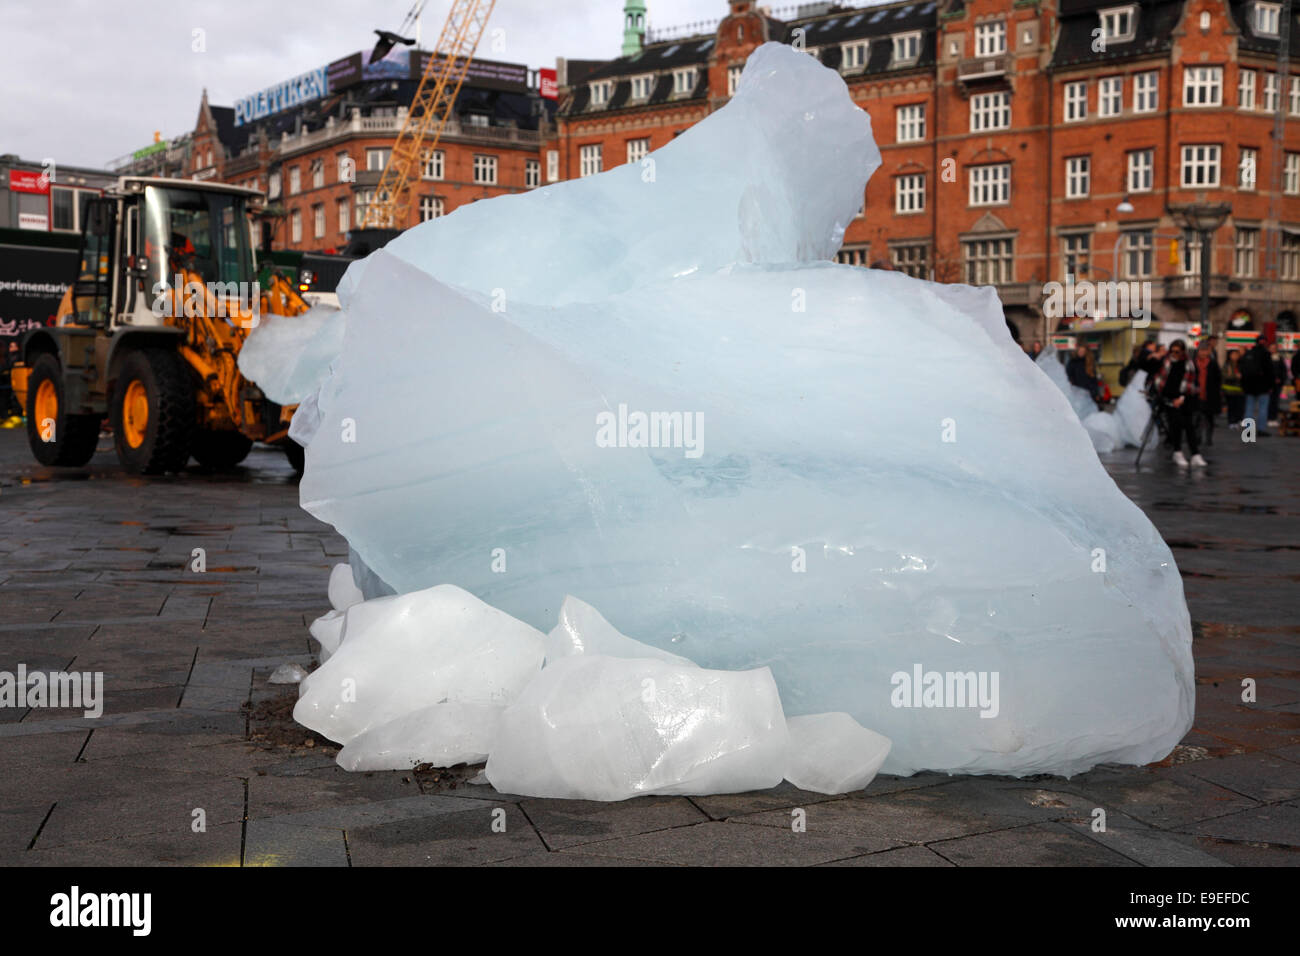 Copenhagen, Denmark. 26 Oct. 2014. The public art piece Ice Watch at the City Hall by Danish-Icelandic artist Olafur Eliasson and geologist Minik Rosing. 100 tons of inland ice transported from Nuup Kangerlua Fiord, Nuuk, Greenland, to Copenhagen in refrigerated containers. The melting of the twelve large ice blocks formed as a clock serves as a climate warming wake-up call: 100 tons of inland ice melt every 100th of a second. The event marks the publication of the Fifth Assessment Report of the UN Intergovernmental Panel on Climate Change meeting 27-31 Oct. in Copenhagen. Stock Photo